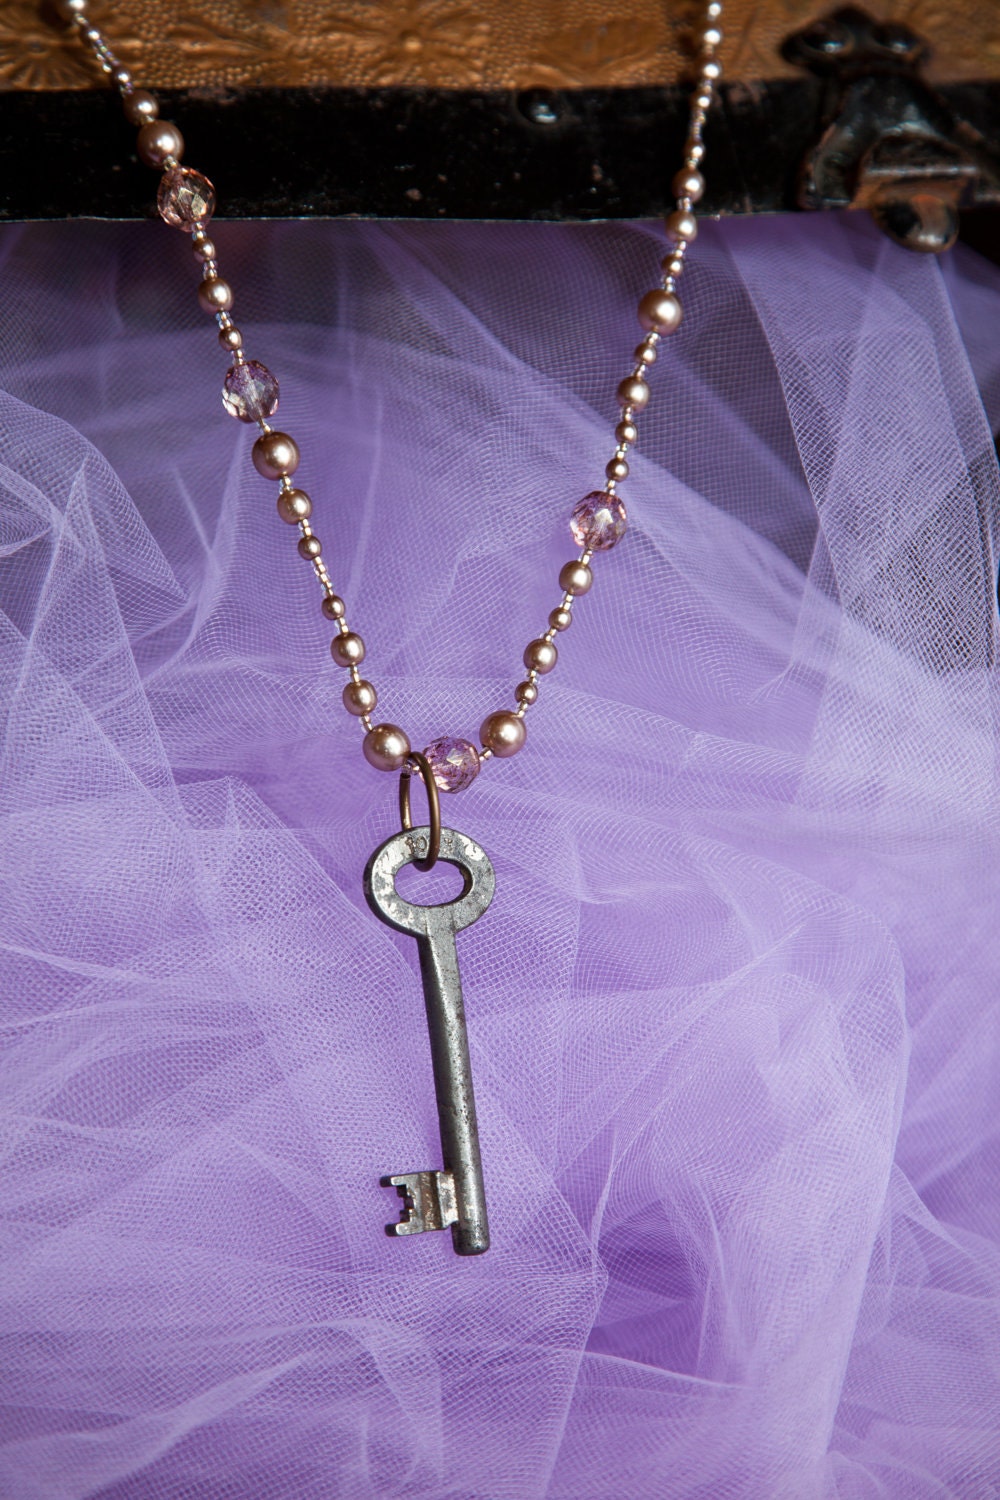 skeleton key necklace with pink and silver beads